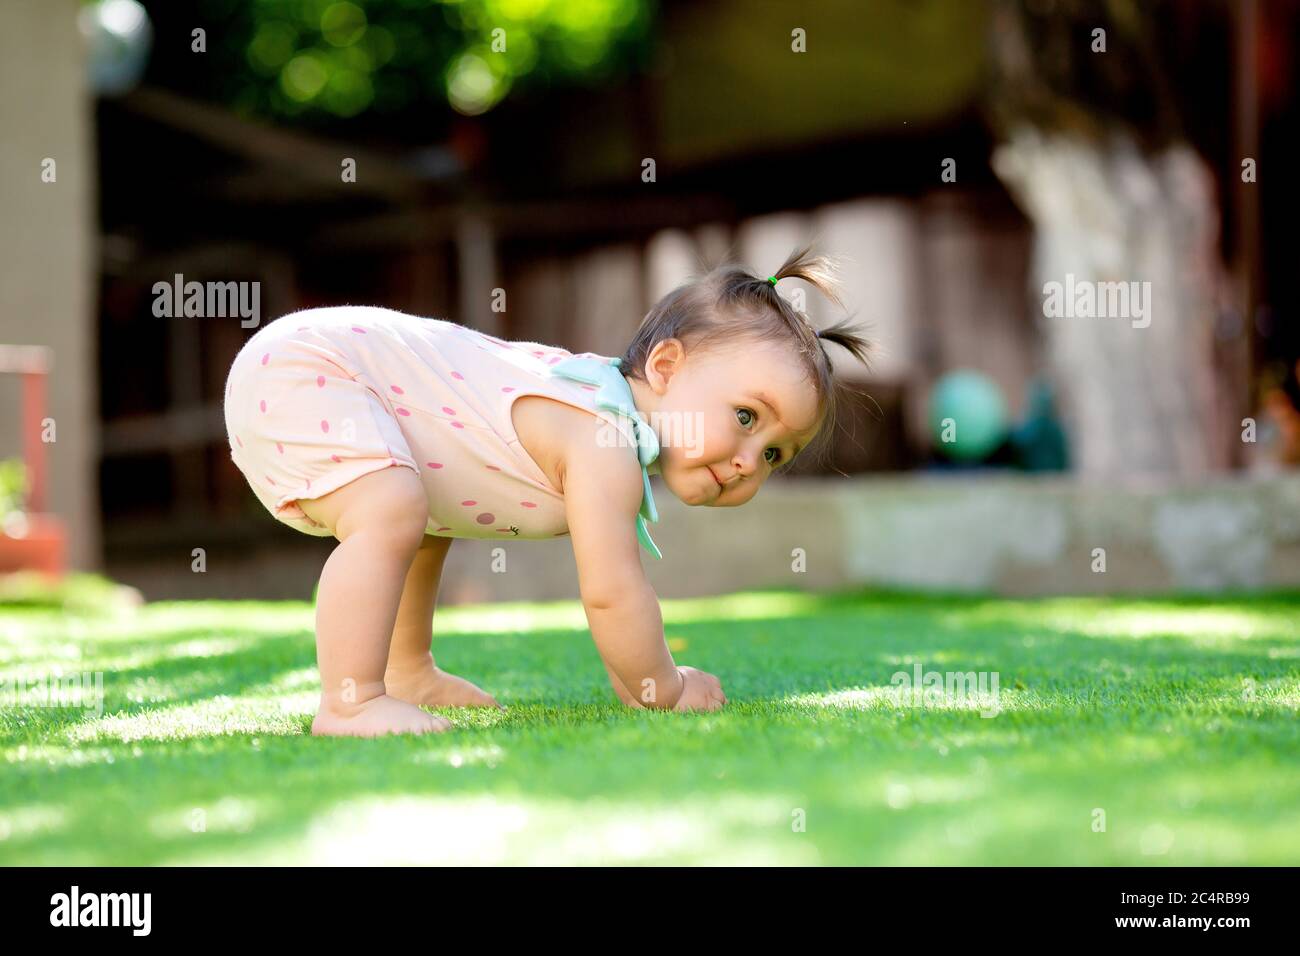 Toddler Girl Learns to Walk Stock Photo